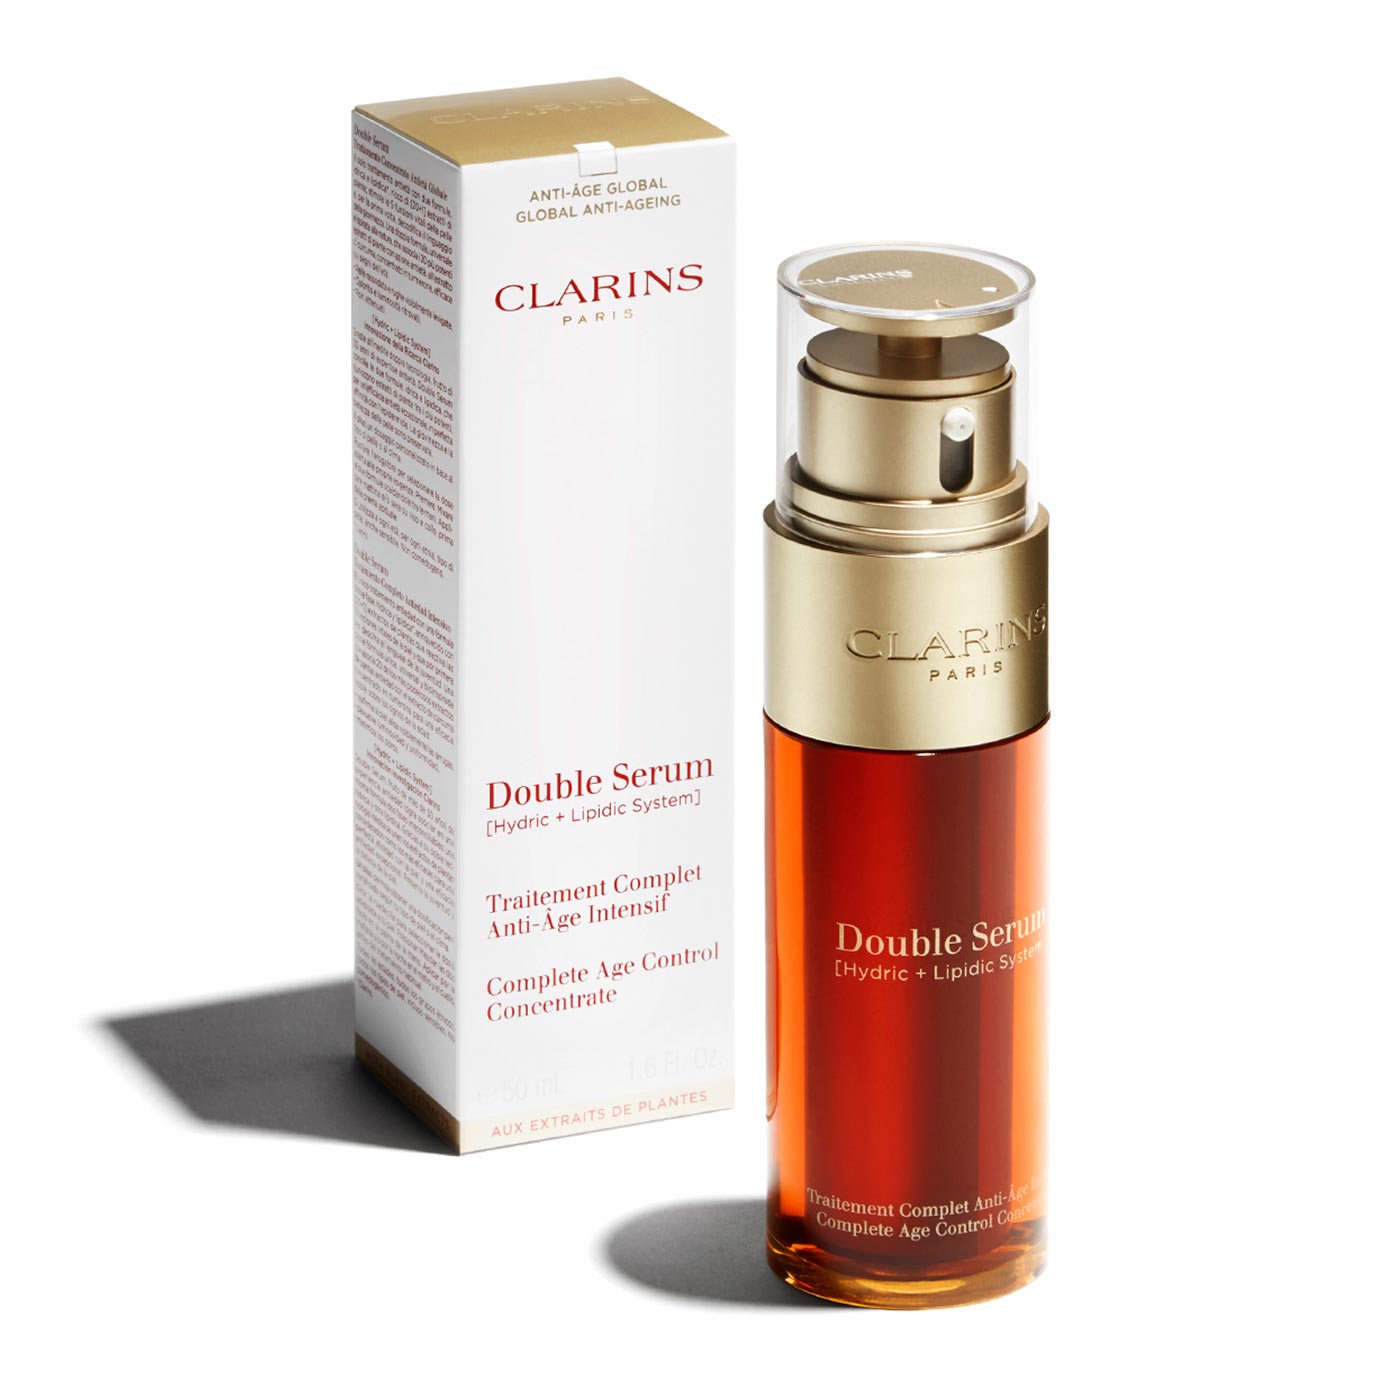 Clarins Double Serum Complete Age Control Concentrate 1.6 oz 50 ml - 52 PCS LOT